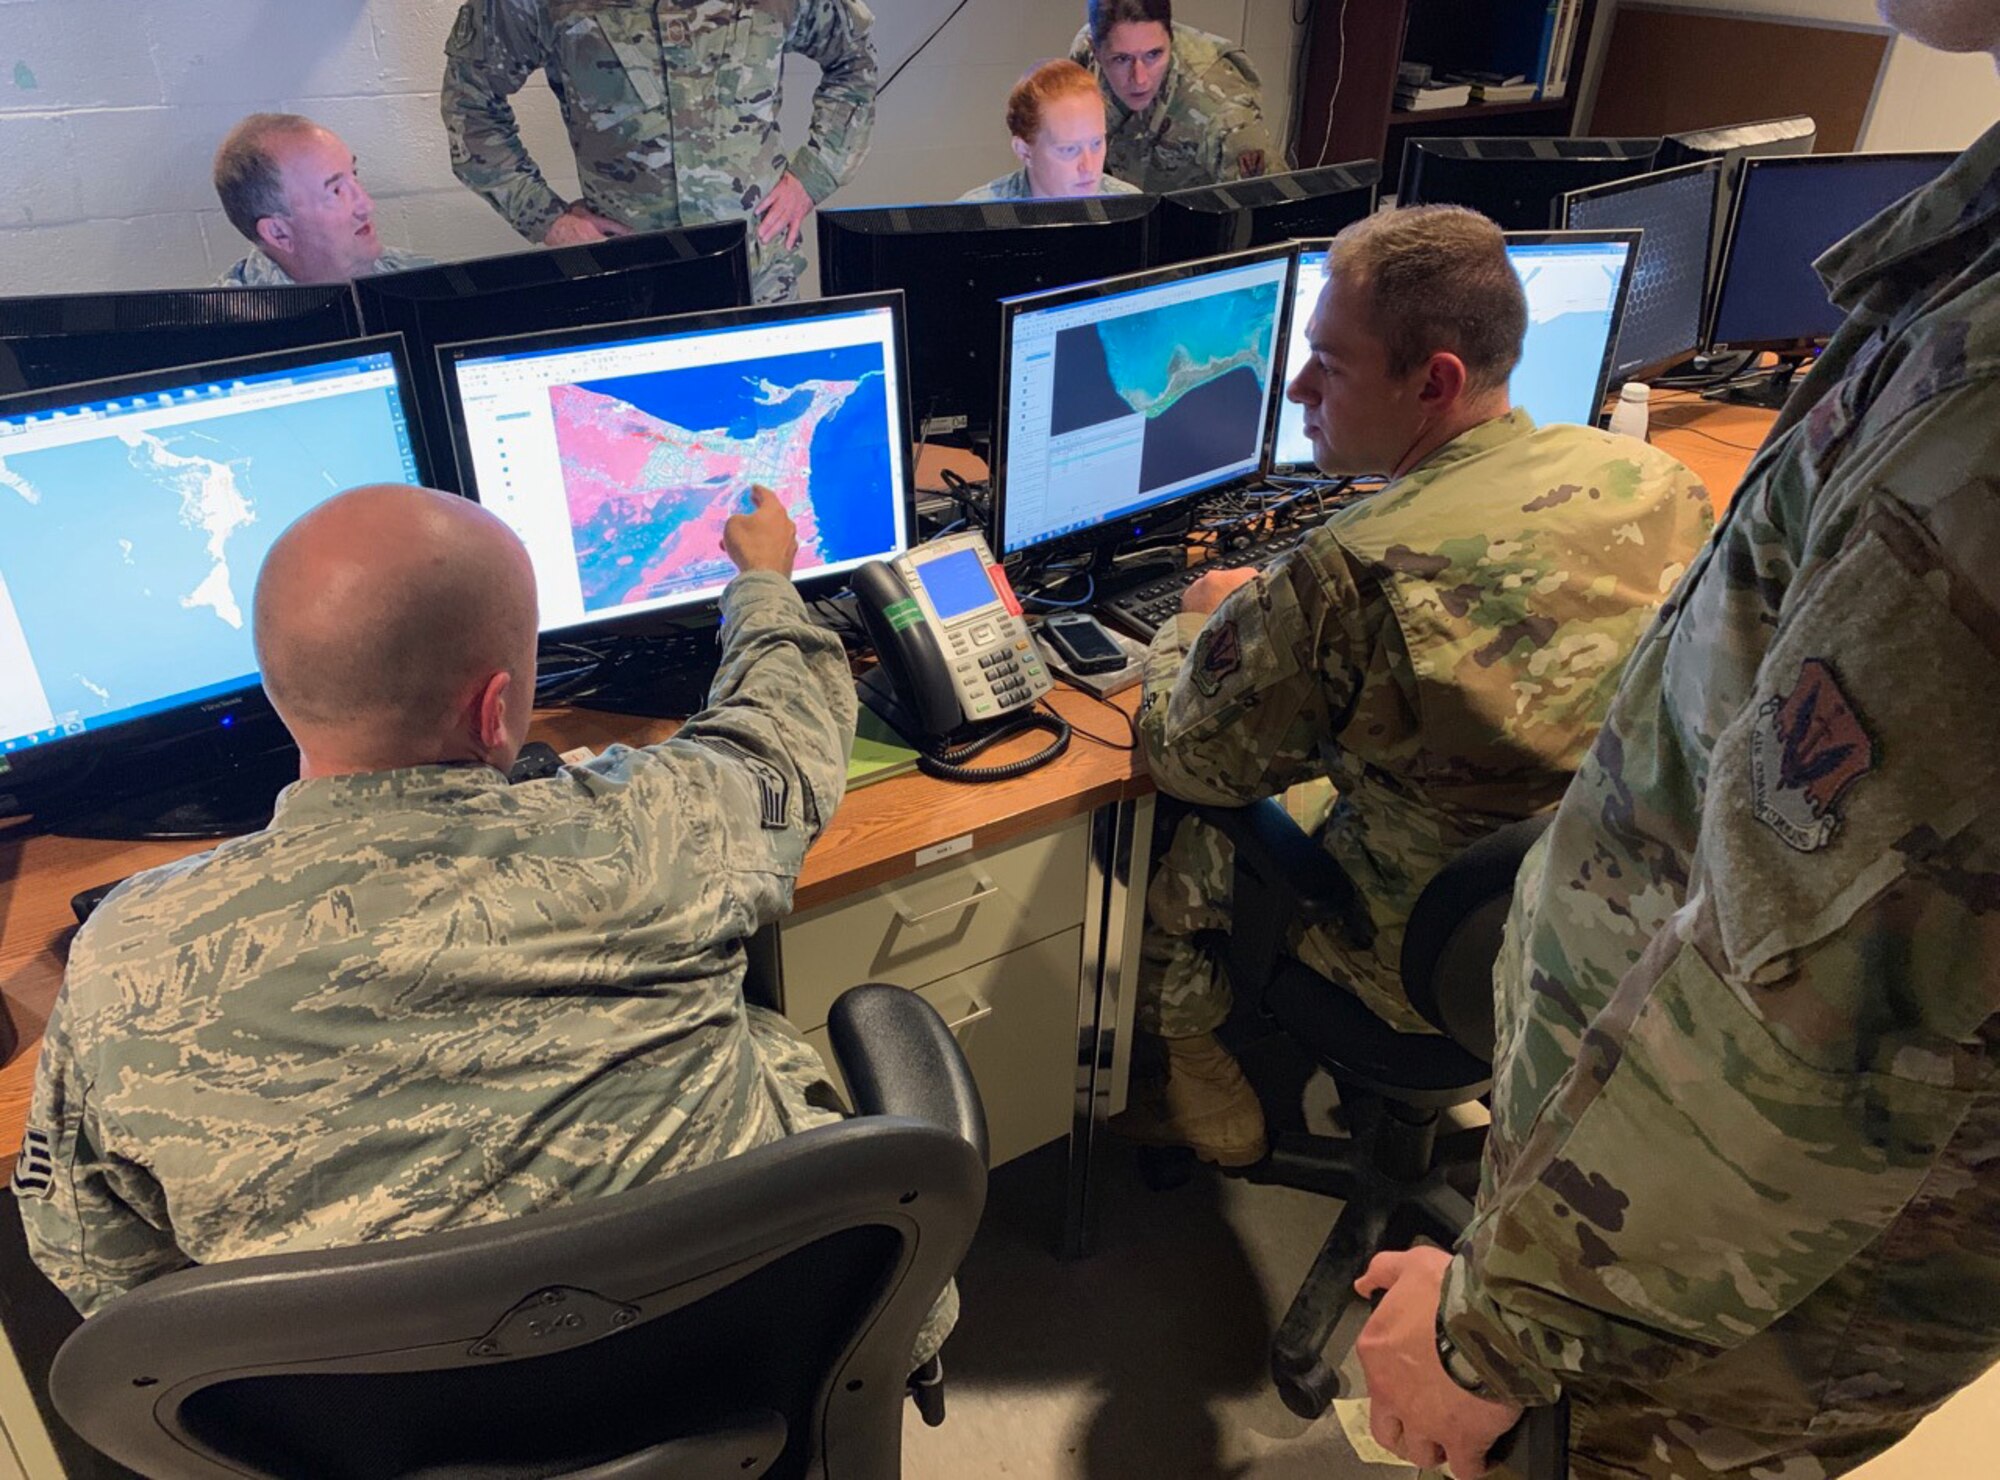 U.S. Air Force Airmen from the 118th Wing, Tennessee Air National Guard use their imagery analysis skills to assess damage in the Bahamas from Hurricane Dorian Sept. 6, 2019 at Berry Field Air National Guard Base, Nashville, Tenn. The products produced by the Airmen are sent to higher headquarters, who then use them to more effectively direct first responders on the ground. (U.S. Air National Guard photo by Master Sgt. Jeremy Cornelius)